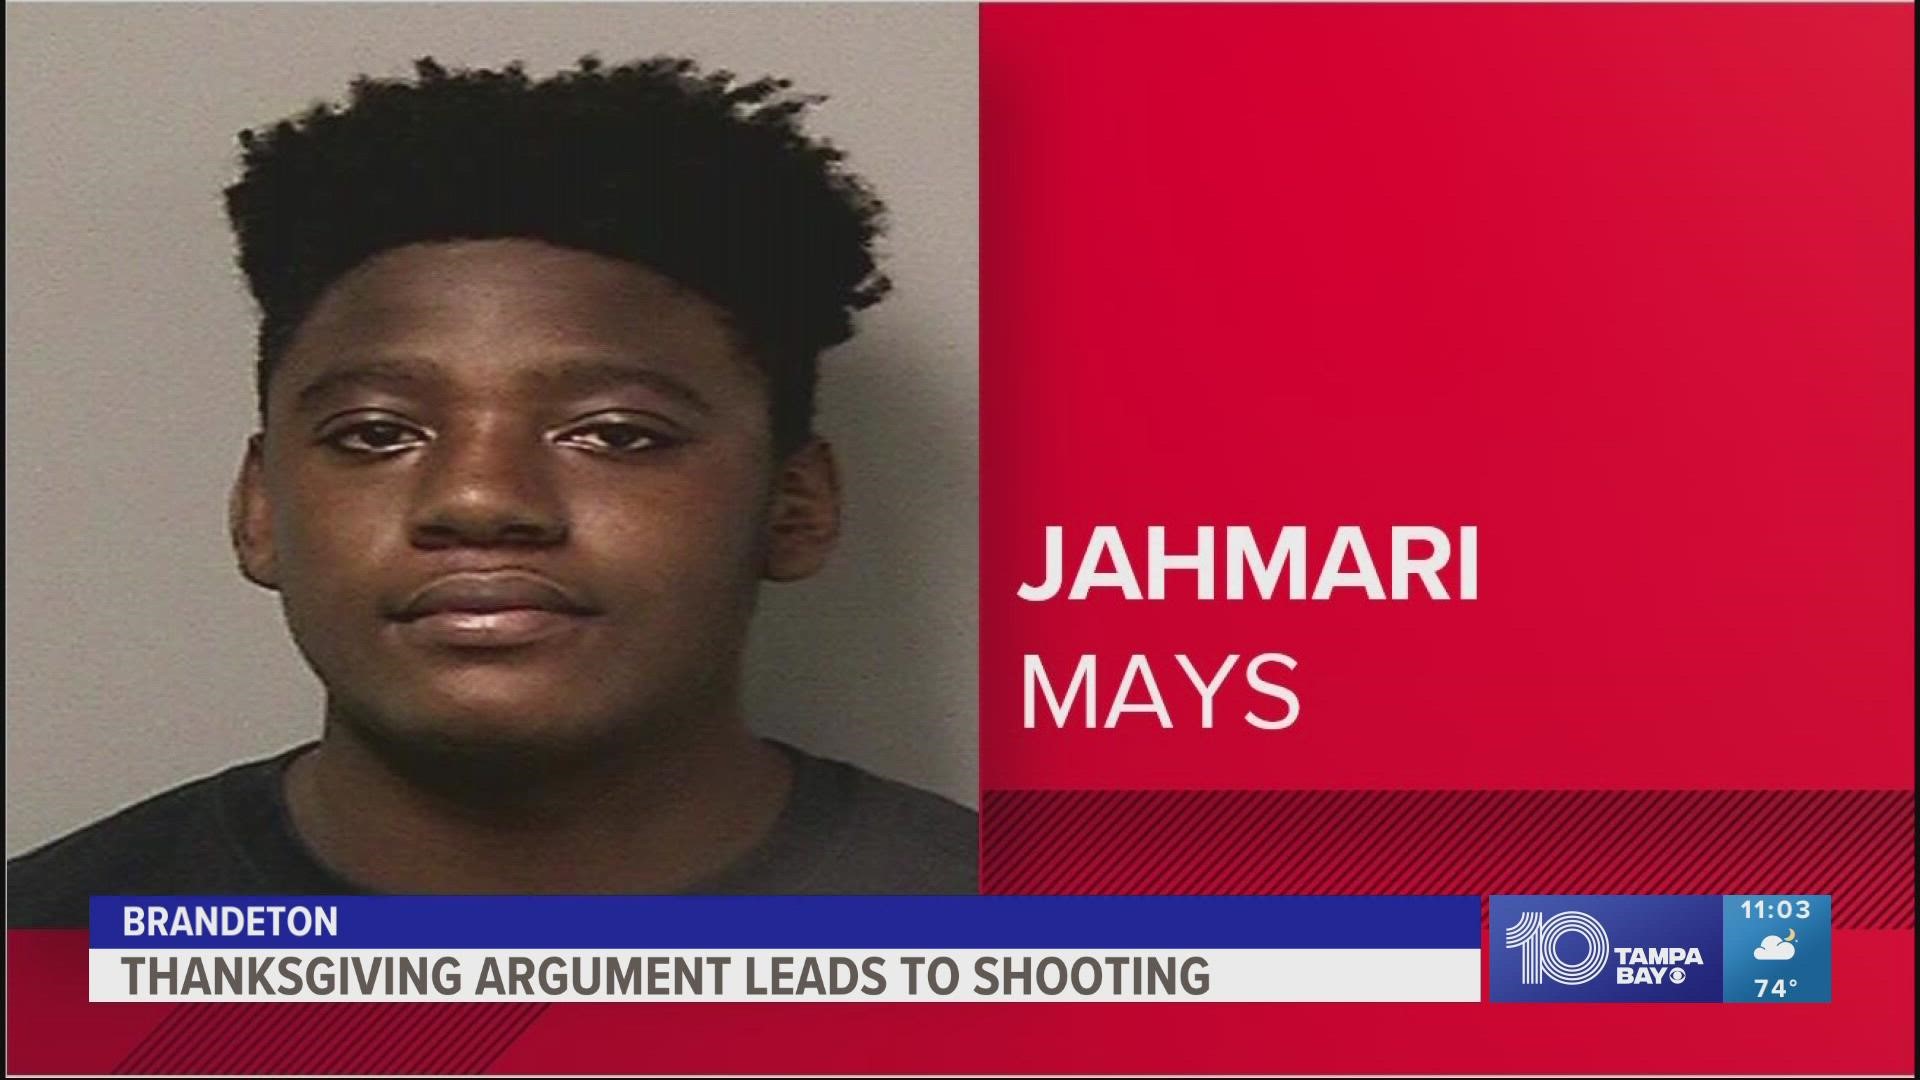 Jahmari Mays and a 23-year-old man had been arguing before the shooting, authorities said.